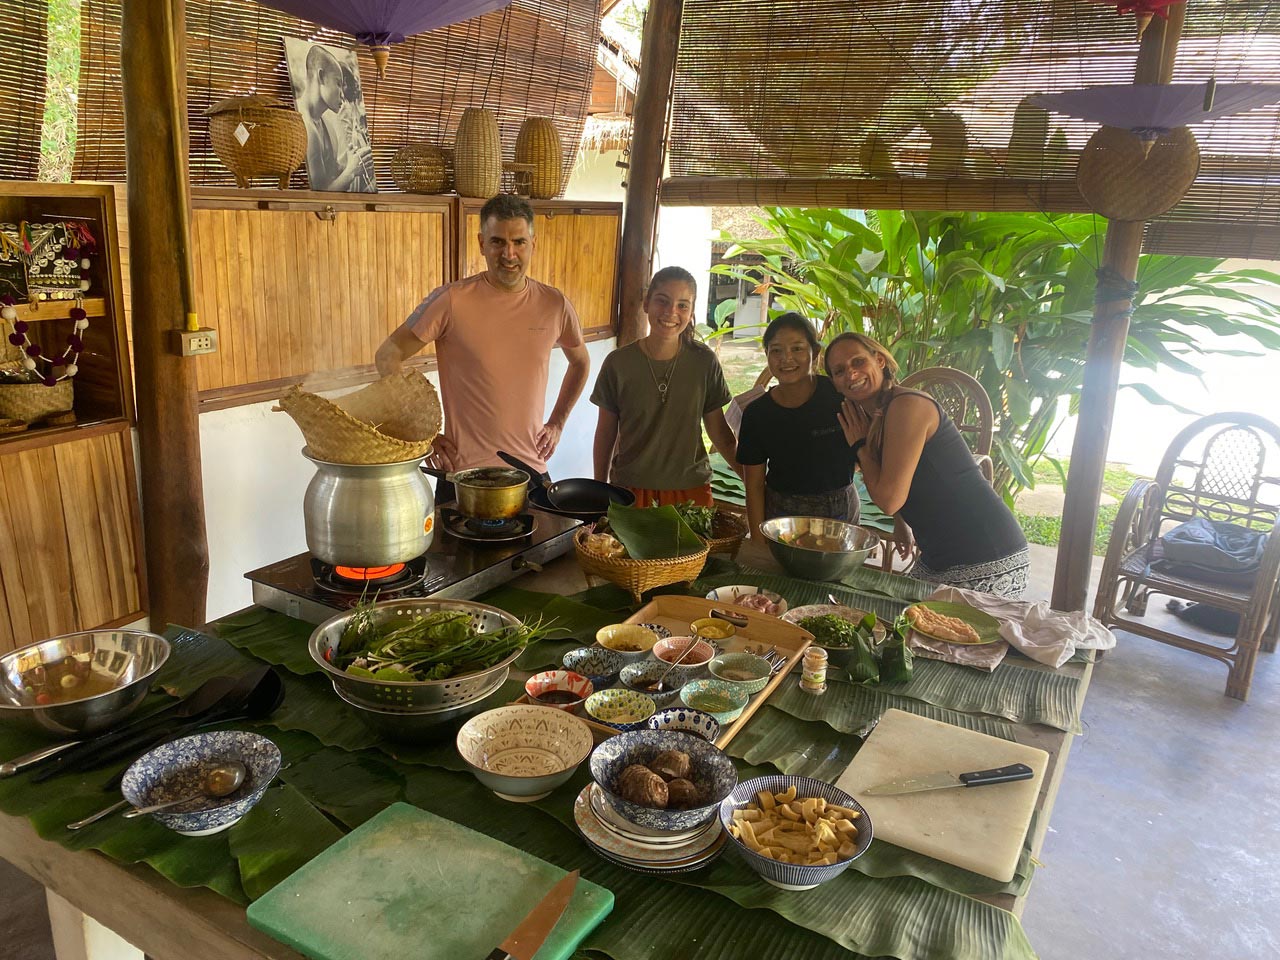 A group of people attending a cooking class, standing around a table with food on it.